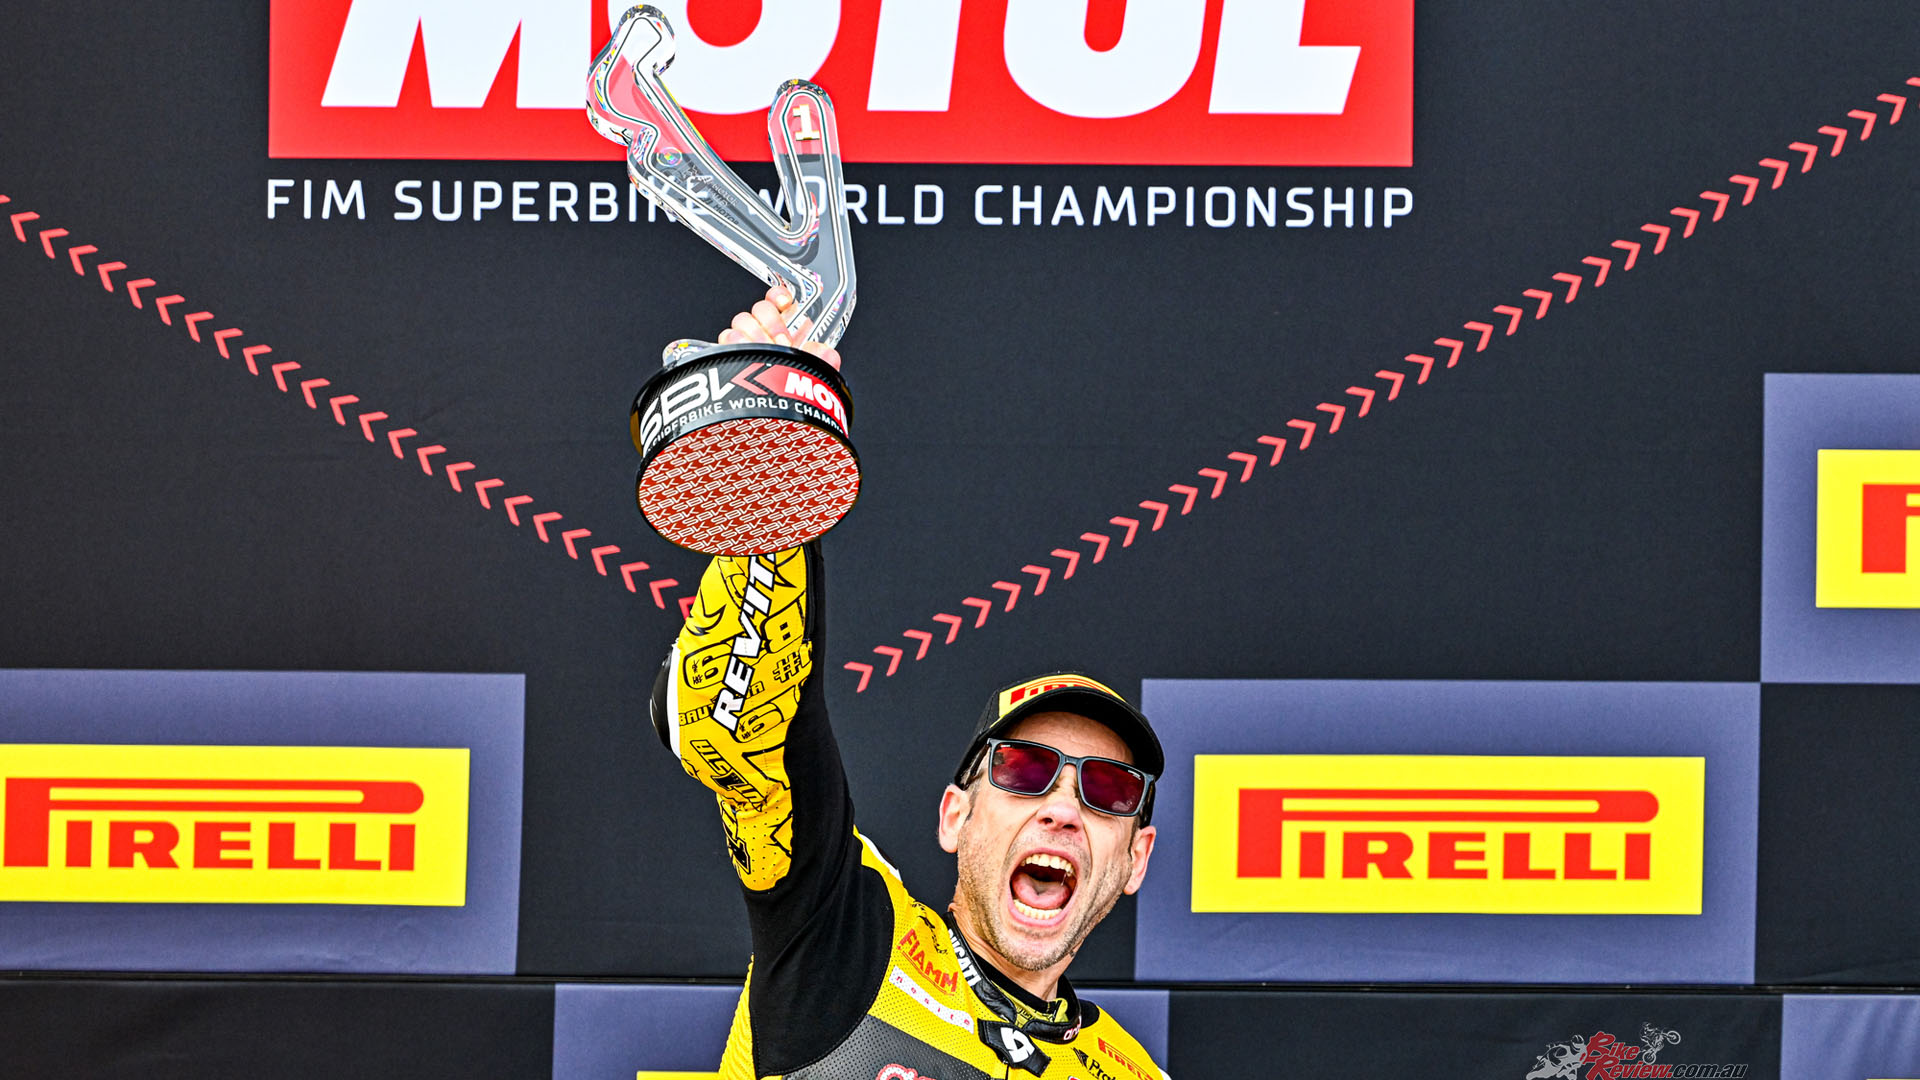 Reigning Champion Alvaro Bautista was one of two riders to use the SCX tyre as everyone else opted for the new SCQ at Misano.